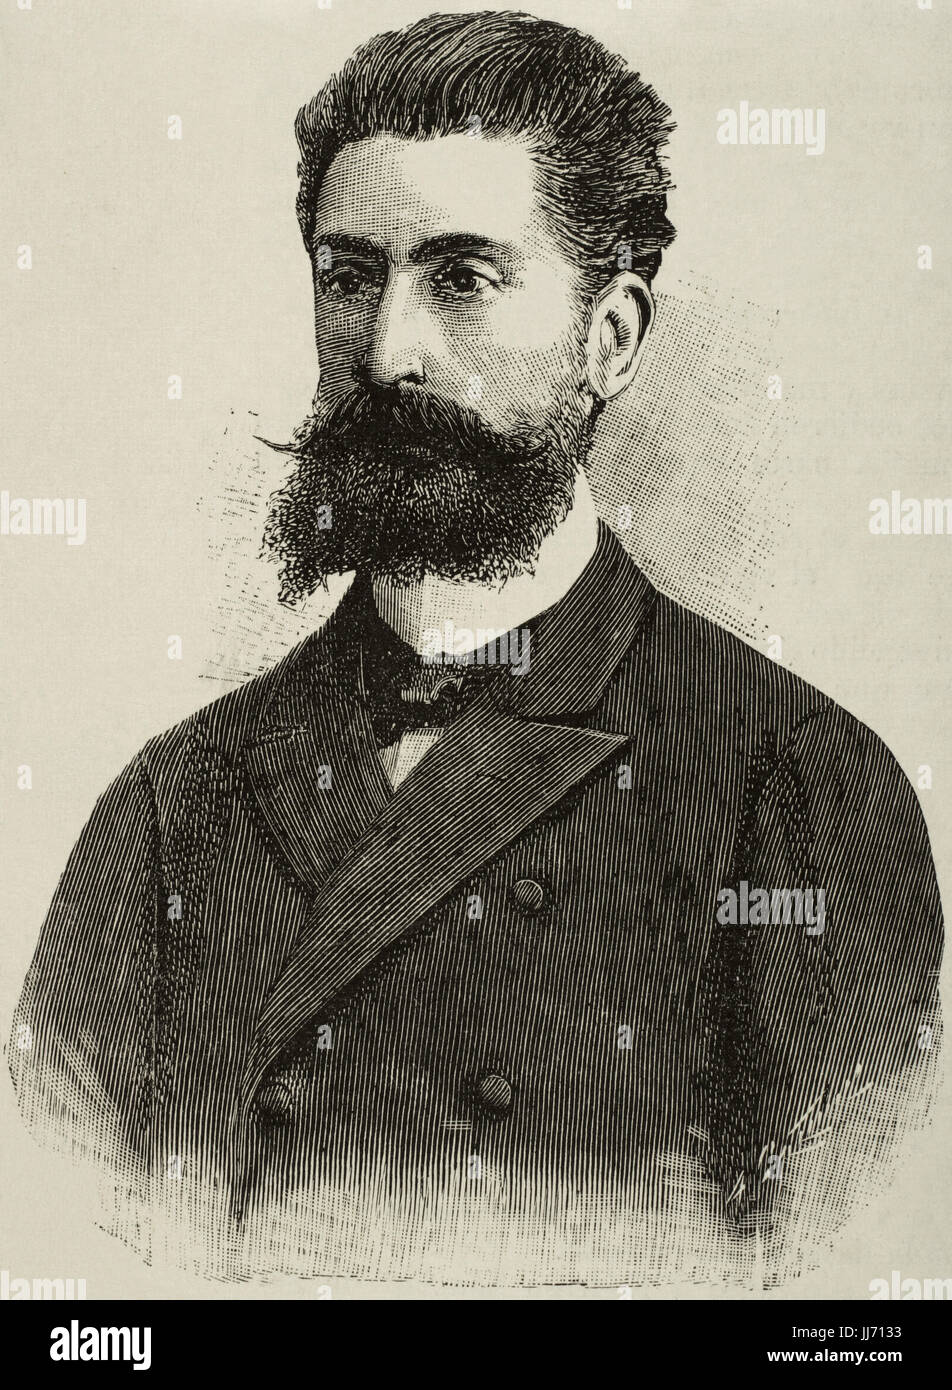 Eduardo Viscasillas Blanque (1848-1935). Spanish composer and diplomatic. Engraving by Arturo Carretero (1852-1903). The Spanish and American Illustration 1892. Stock Photo